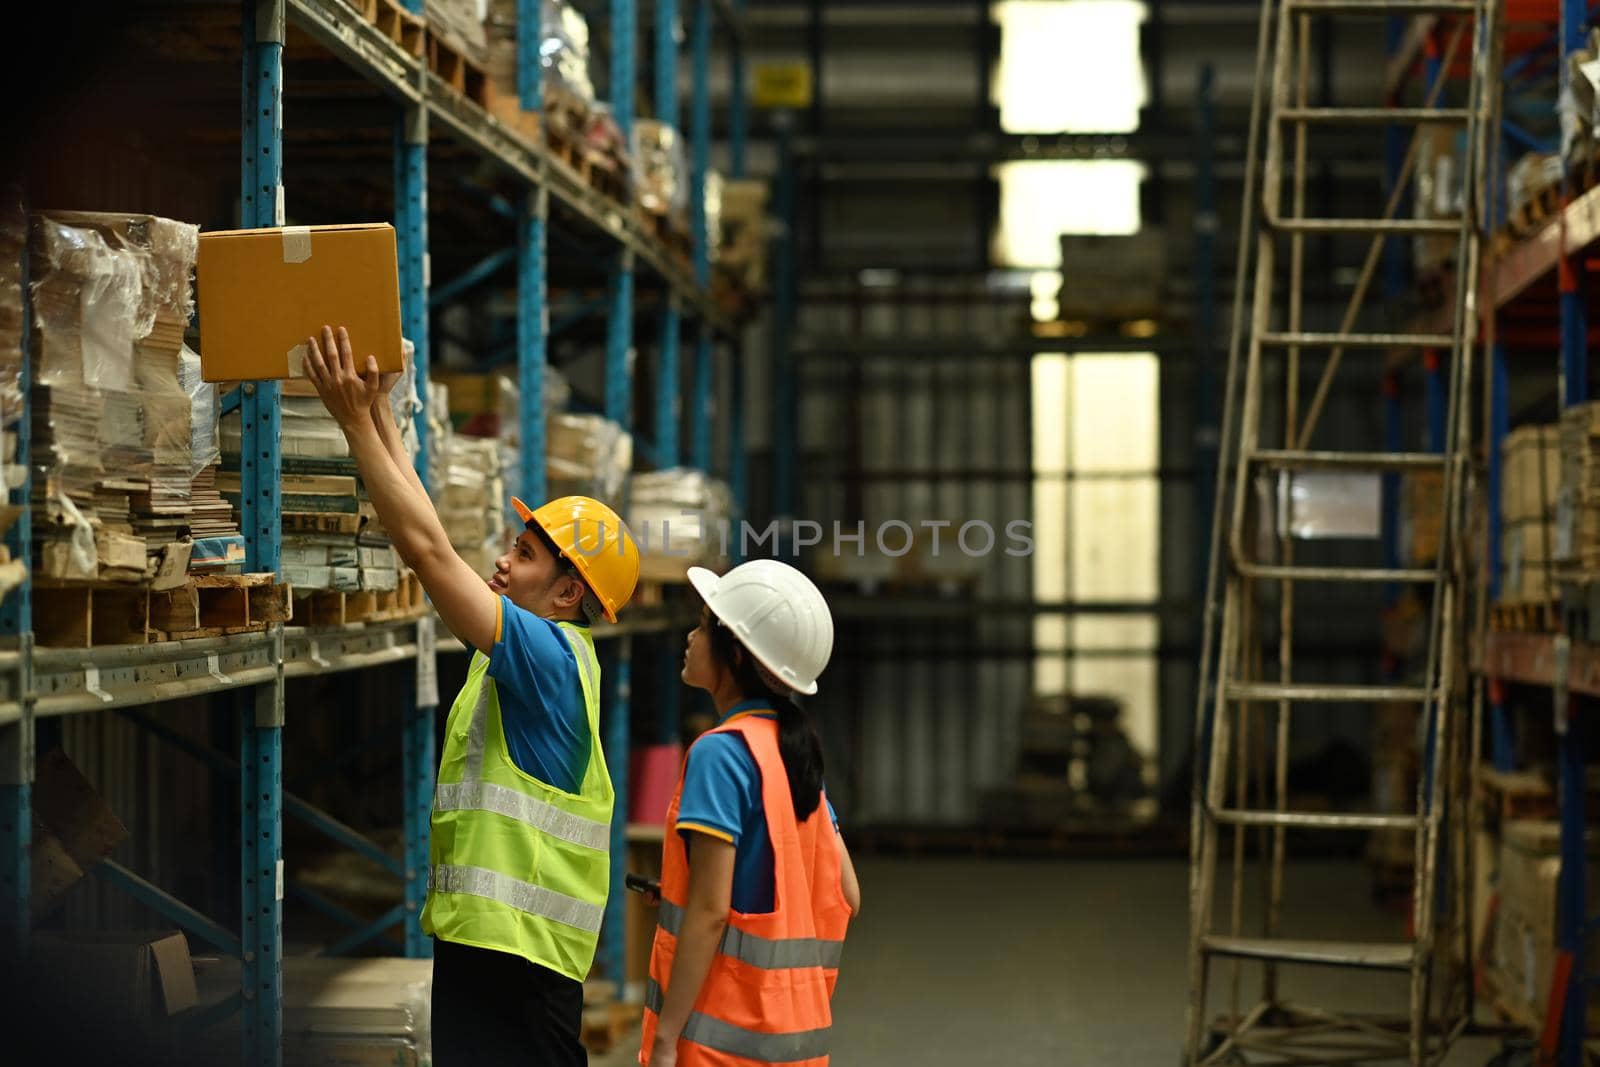 Two young colleagues wearing hardhat and reflective jacket checking stock on the shelves in a large warehouse.